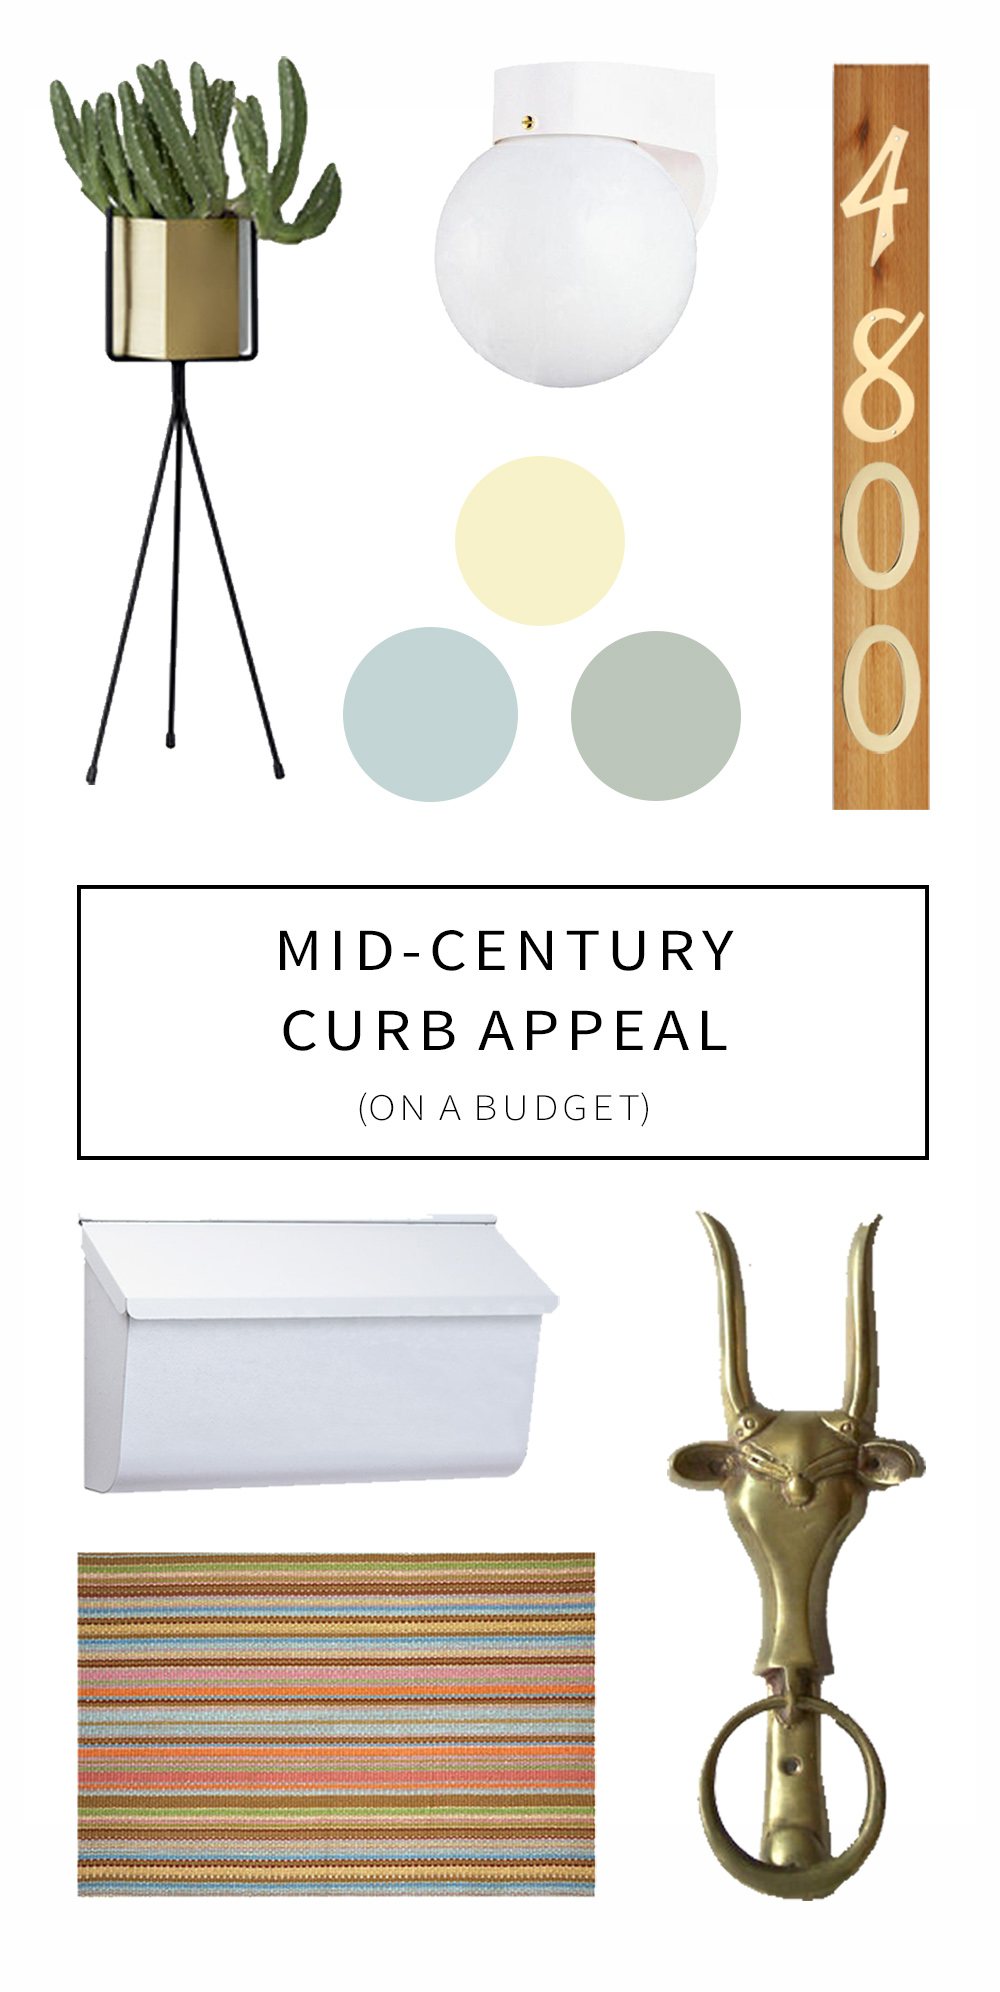 Mid-Century Curb Appeal on A Budget